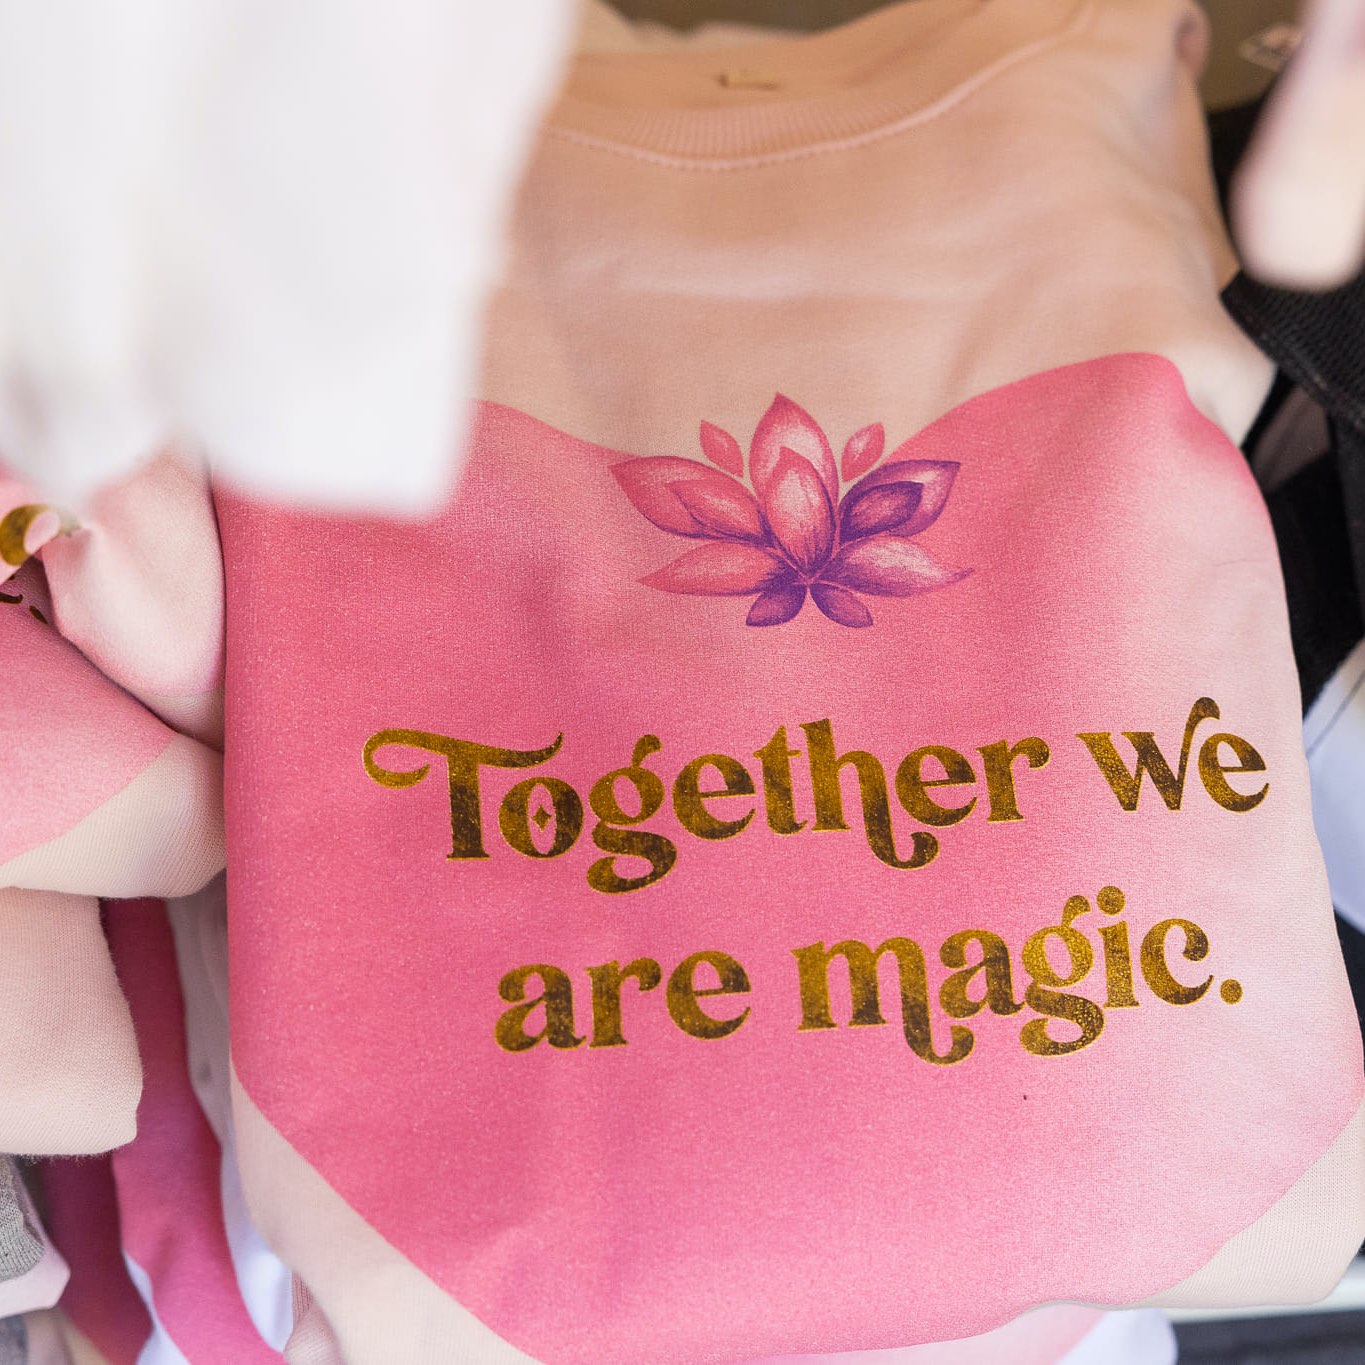 together we are magic sweater by Natural High Healing Festival